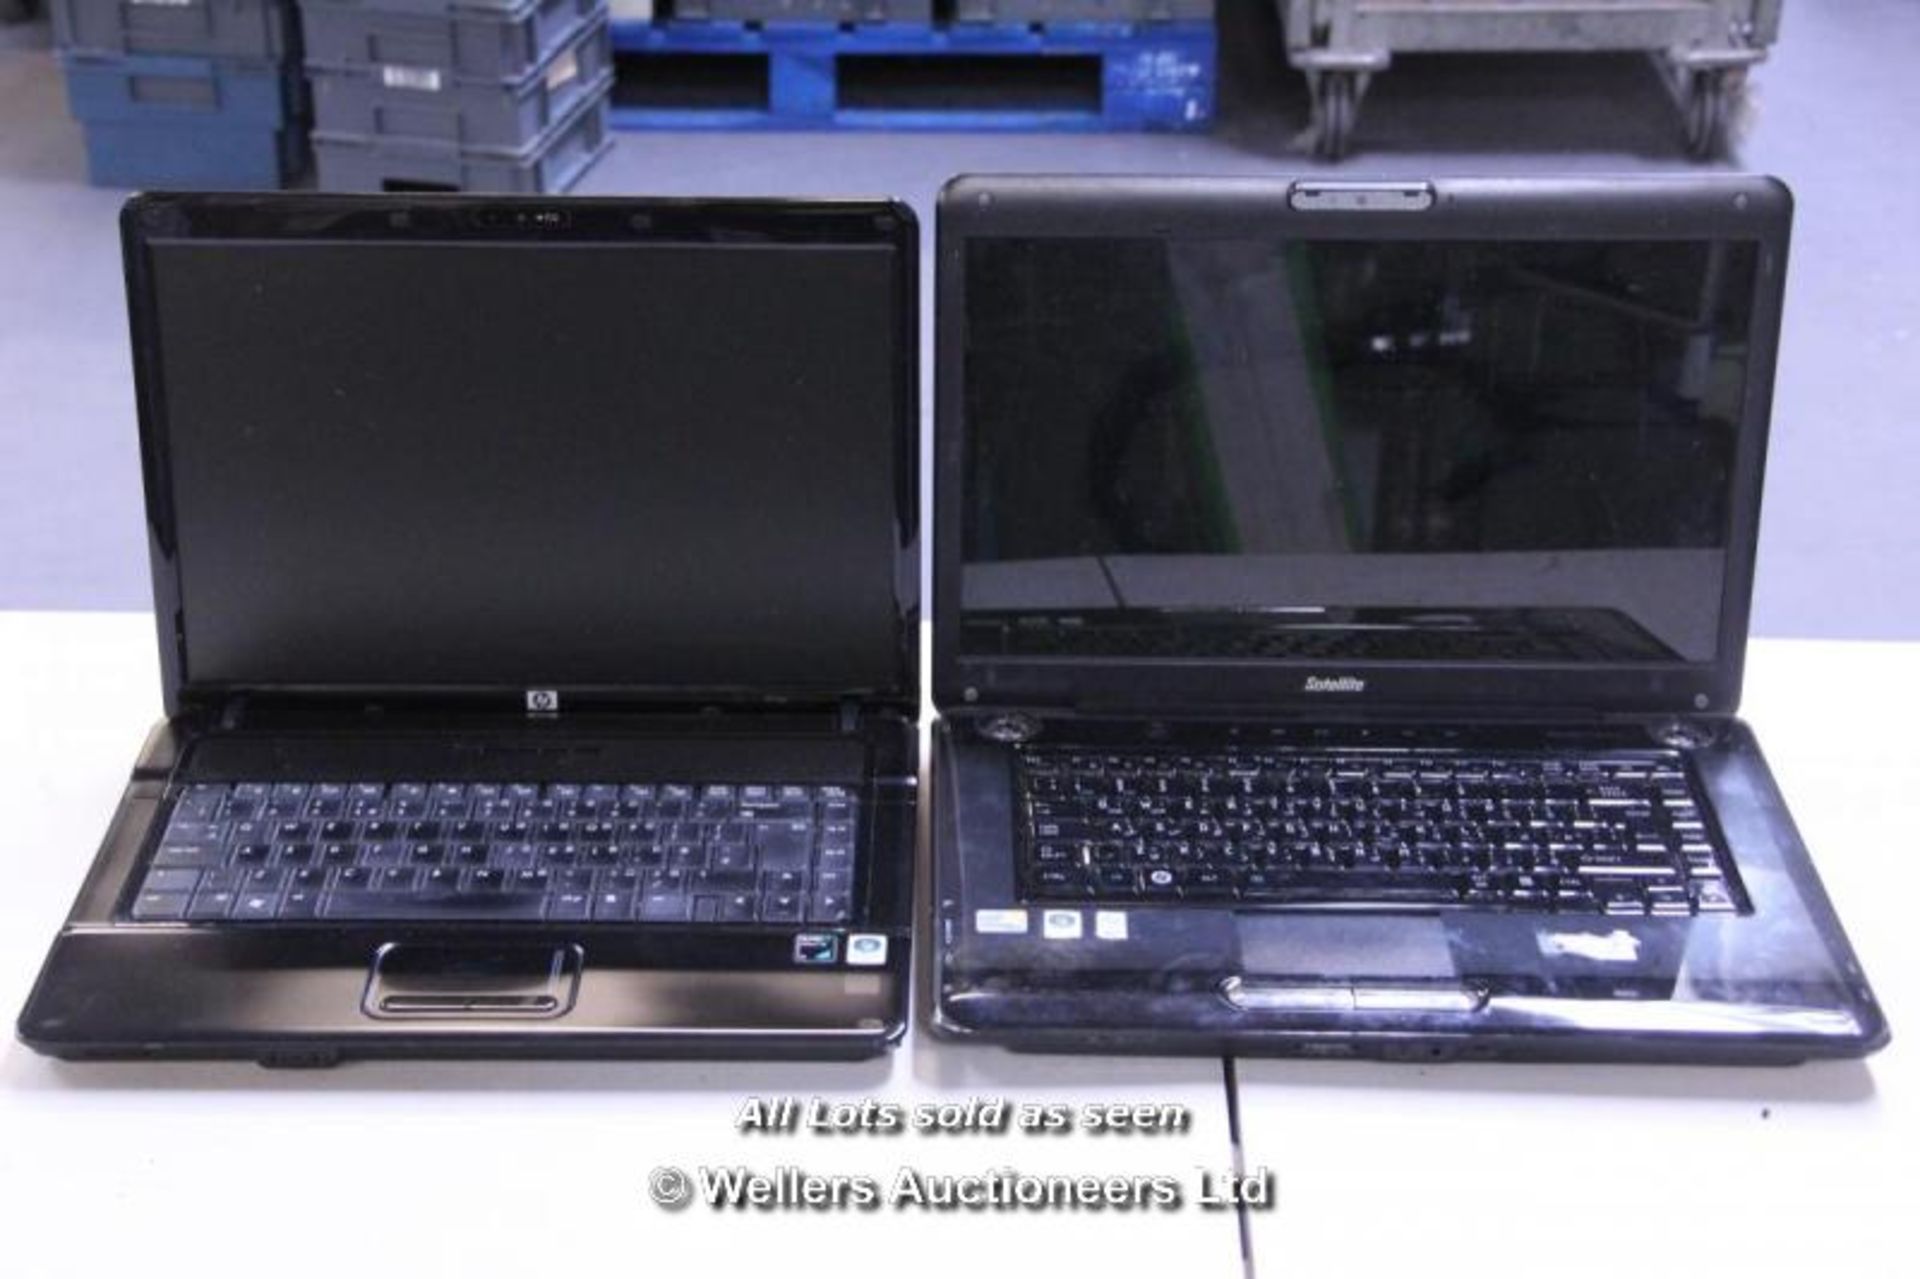 10 X SALVAGE AND UNTESTED LAPTOPS / 4 INCLUDING HARD DRIVES AND 6 WITHOUT HARD DRIVES / SOME UNITS